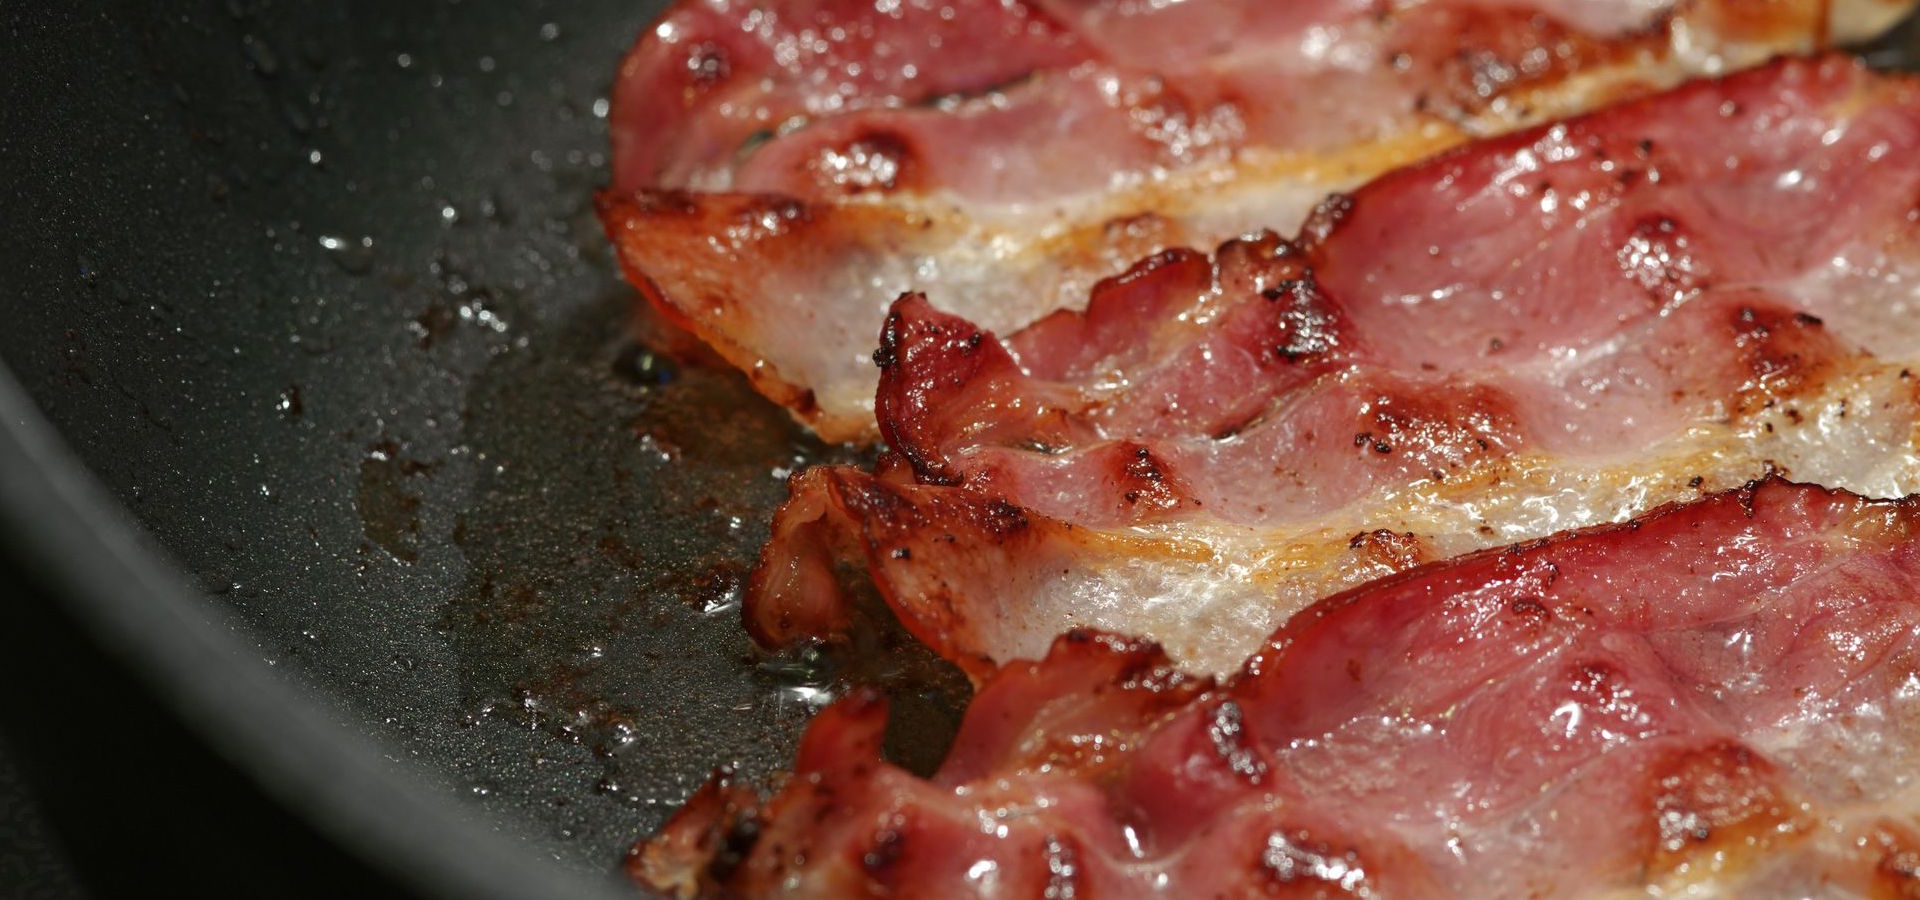 Bacon being fried in a pan.